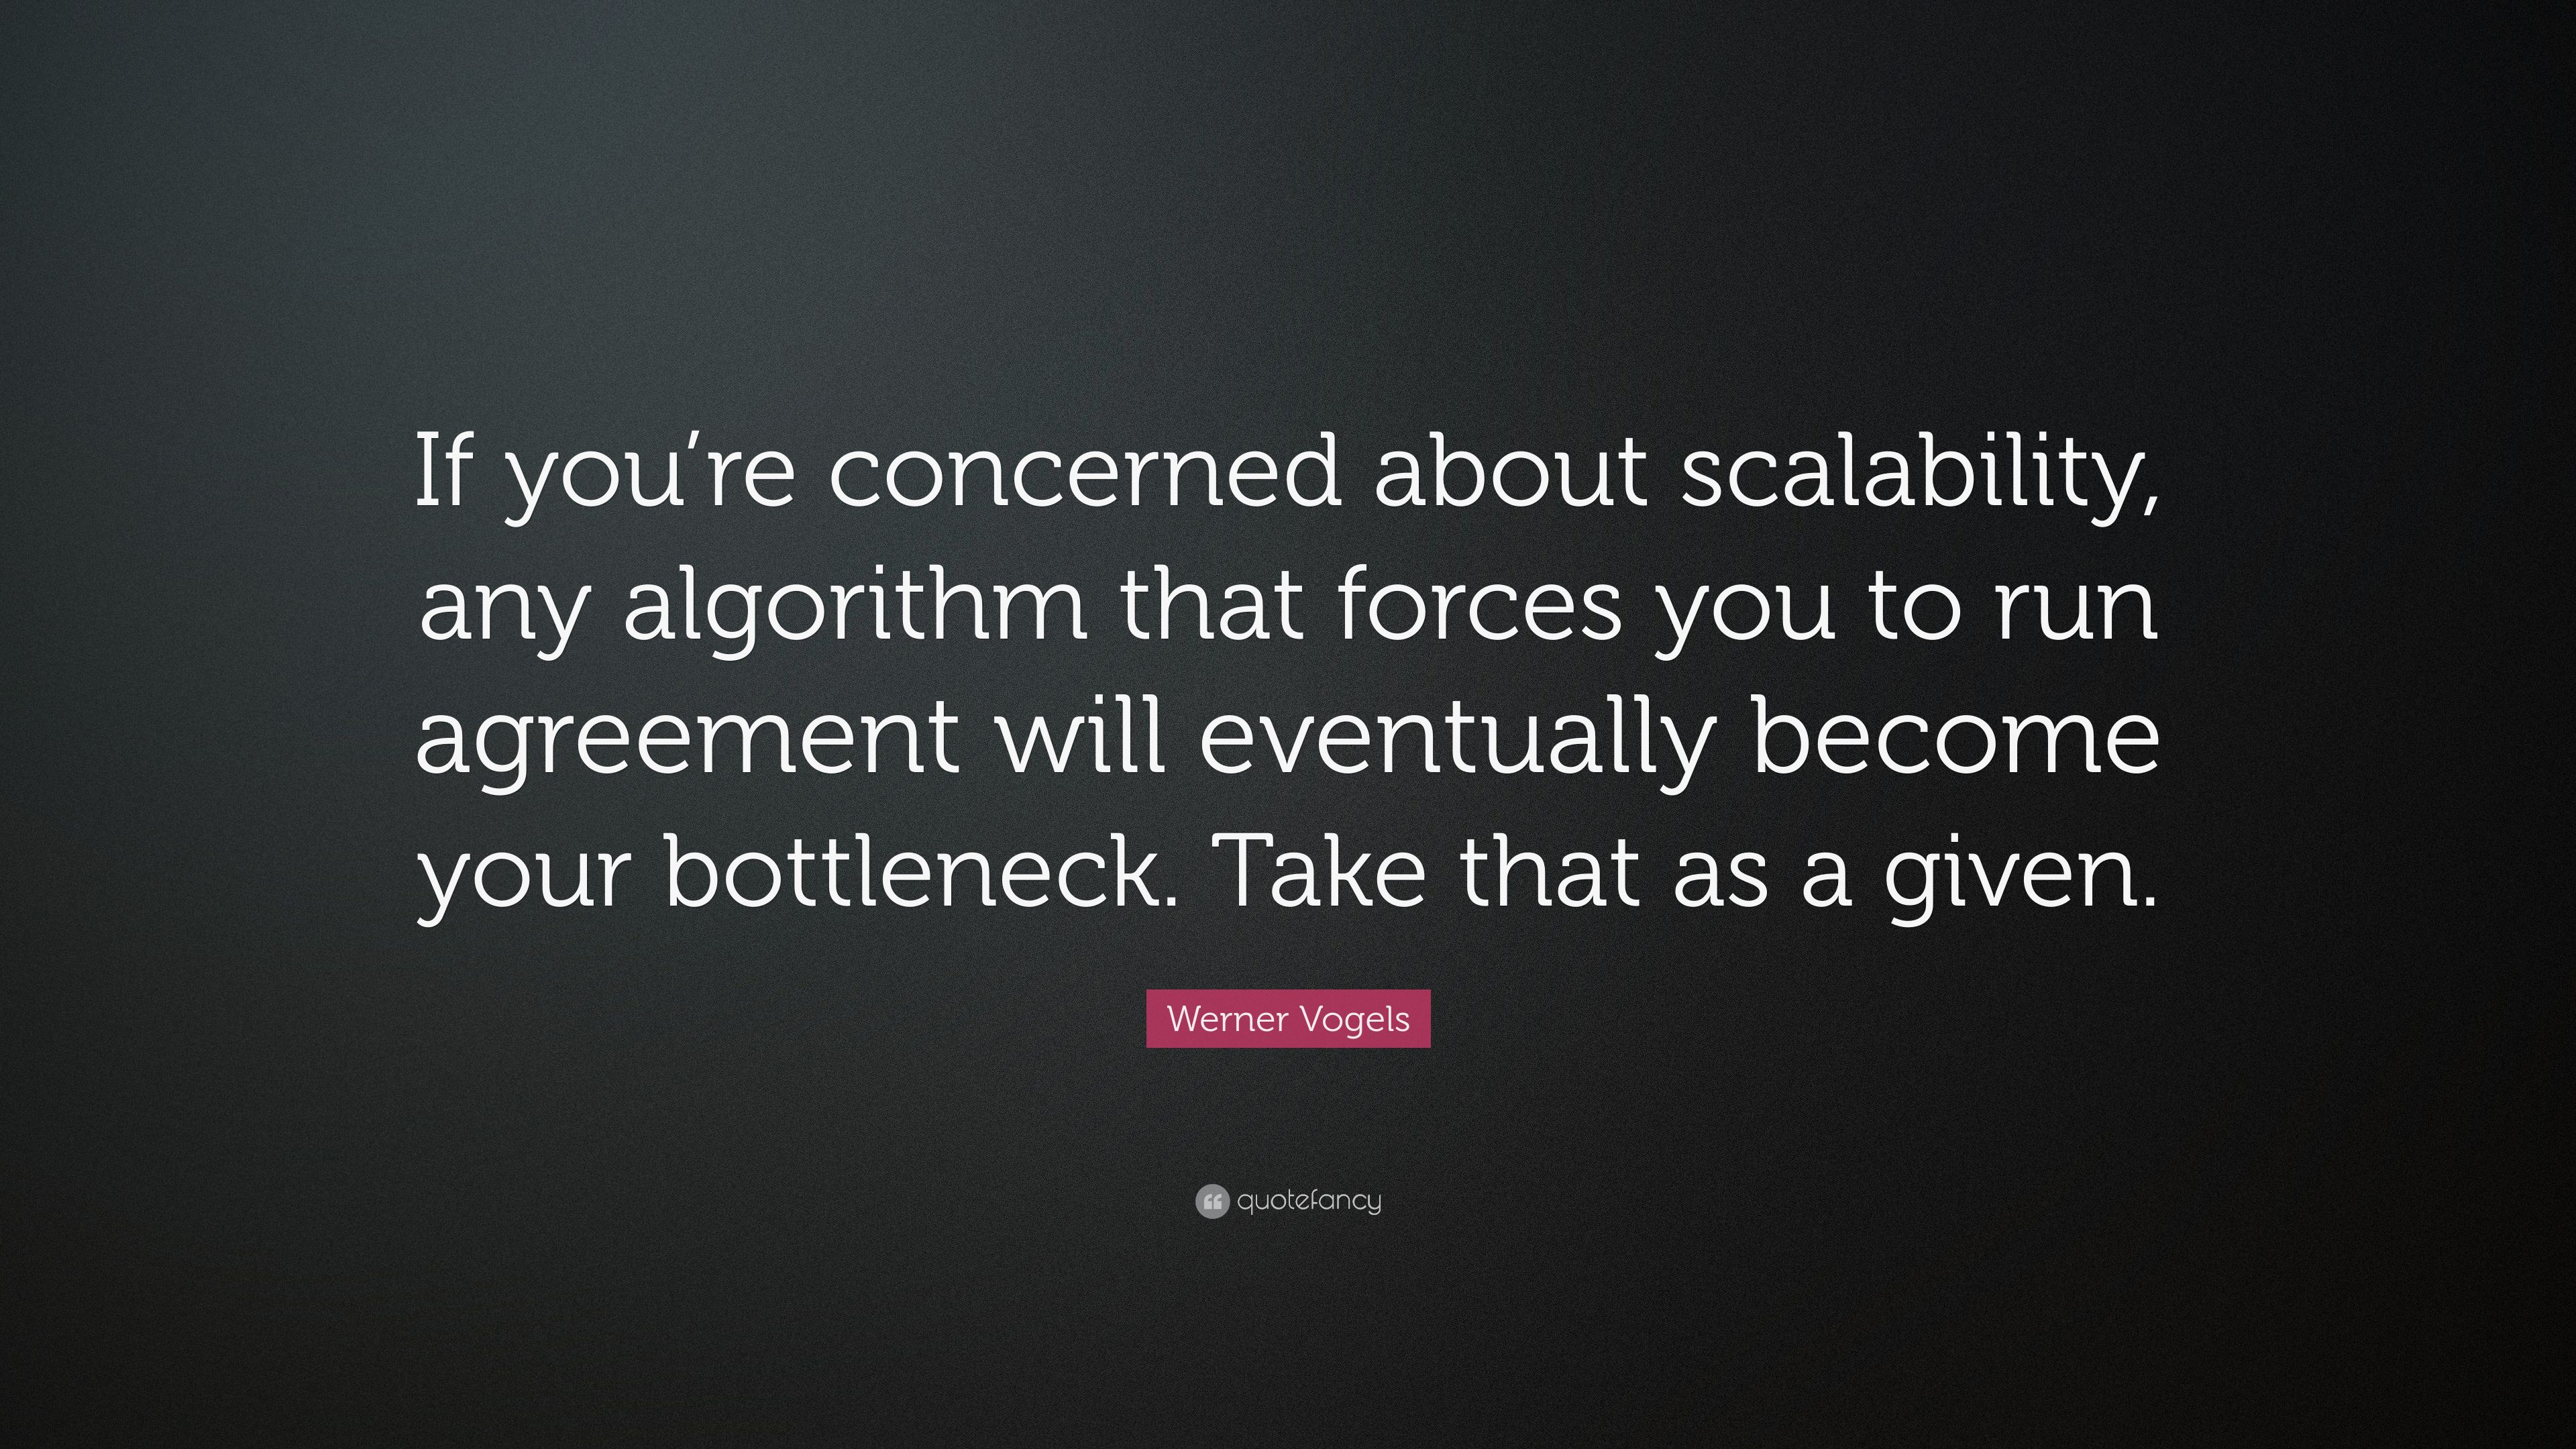 Werner Vogels Quote: “If you're concerned about scalability, any